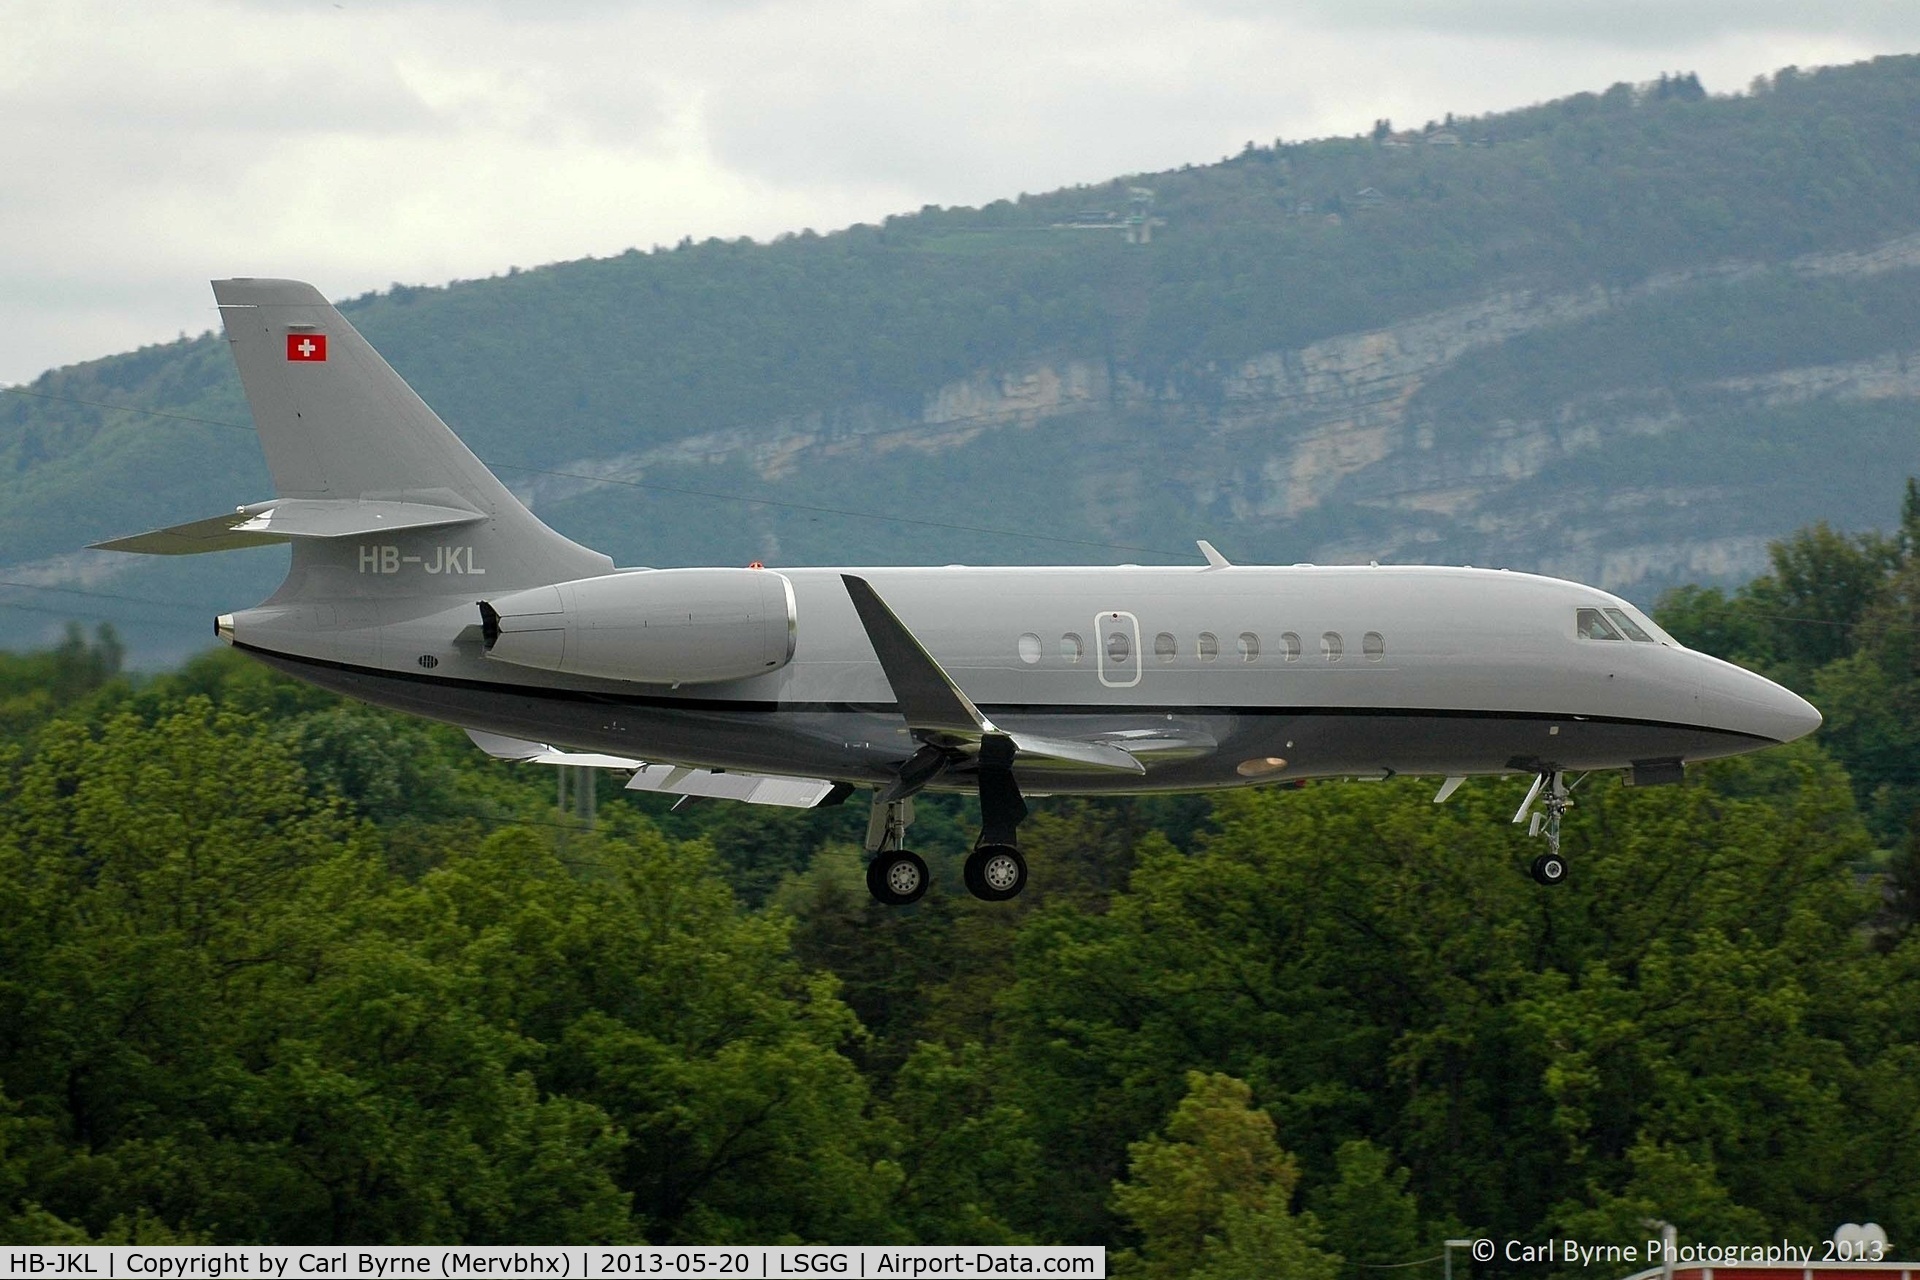 HB-JKL, 2012 Dassault Falcon 2000LX C/N 244, Taken from the park at the 05 threshold.